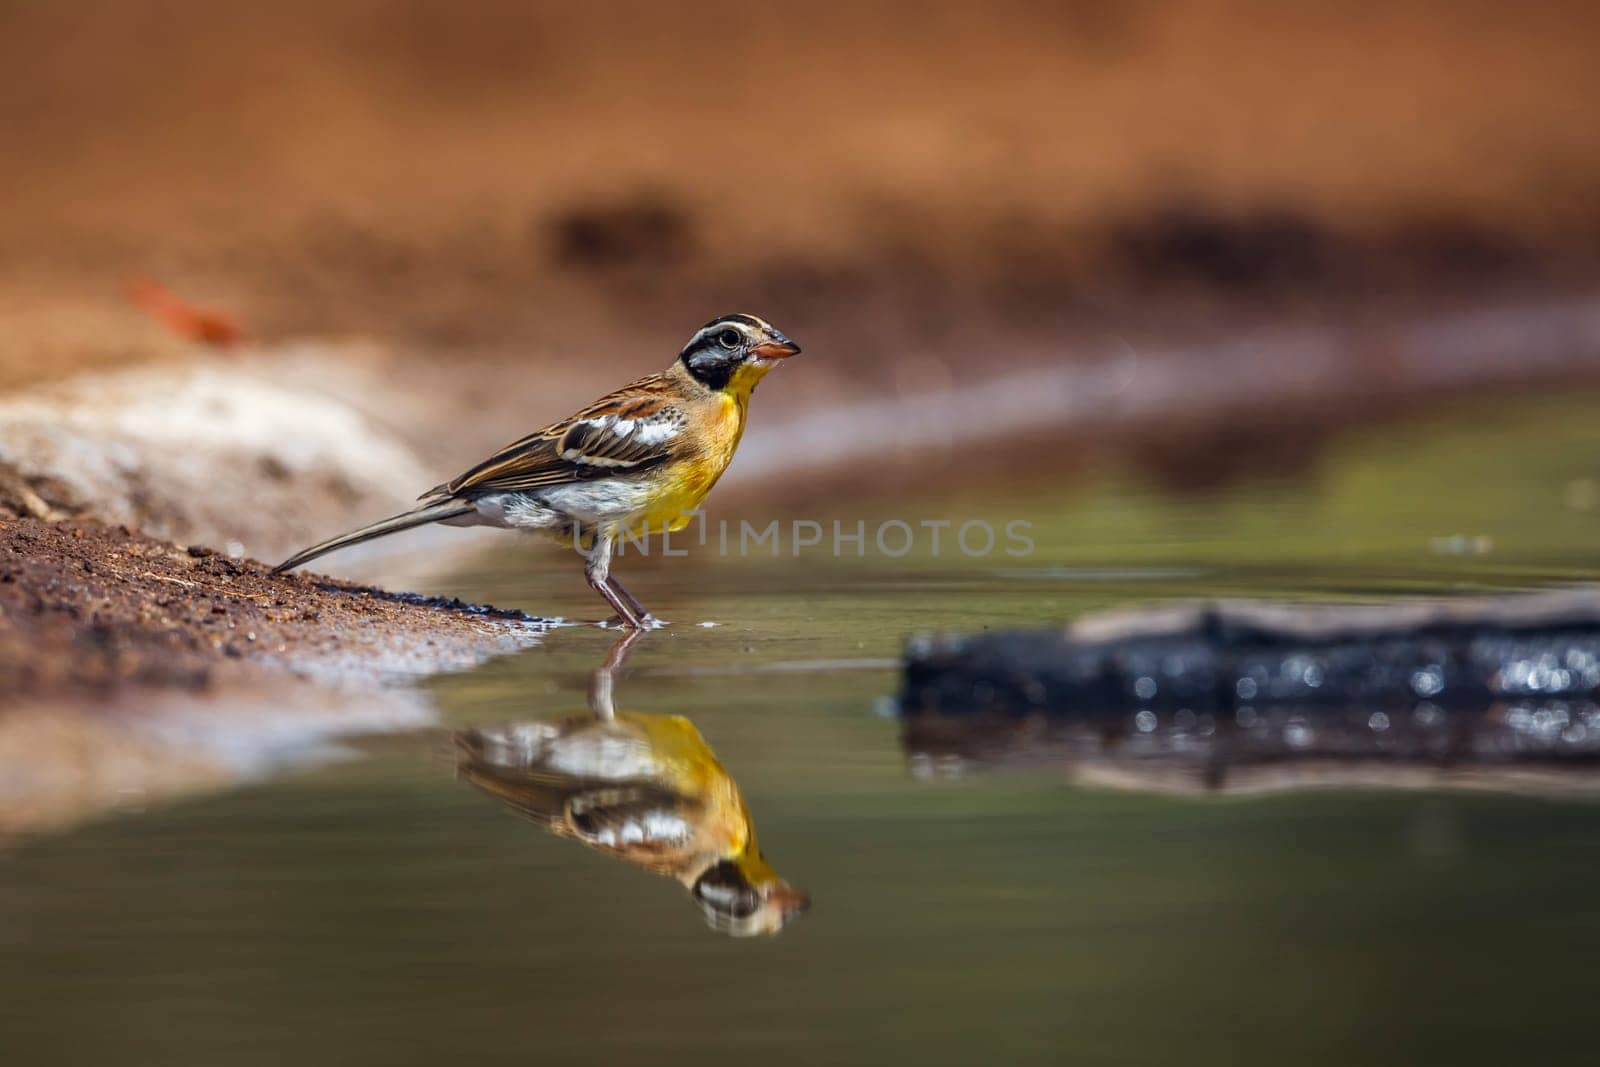 African Golden breasted Bunting male along waterhole with reflection in Kruger National park, South Africa ; Specie Fringillaria flaviventris family of Emberizidae